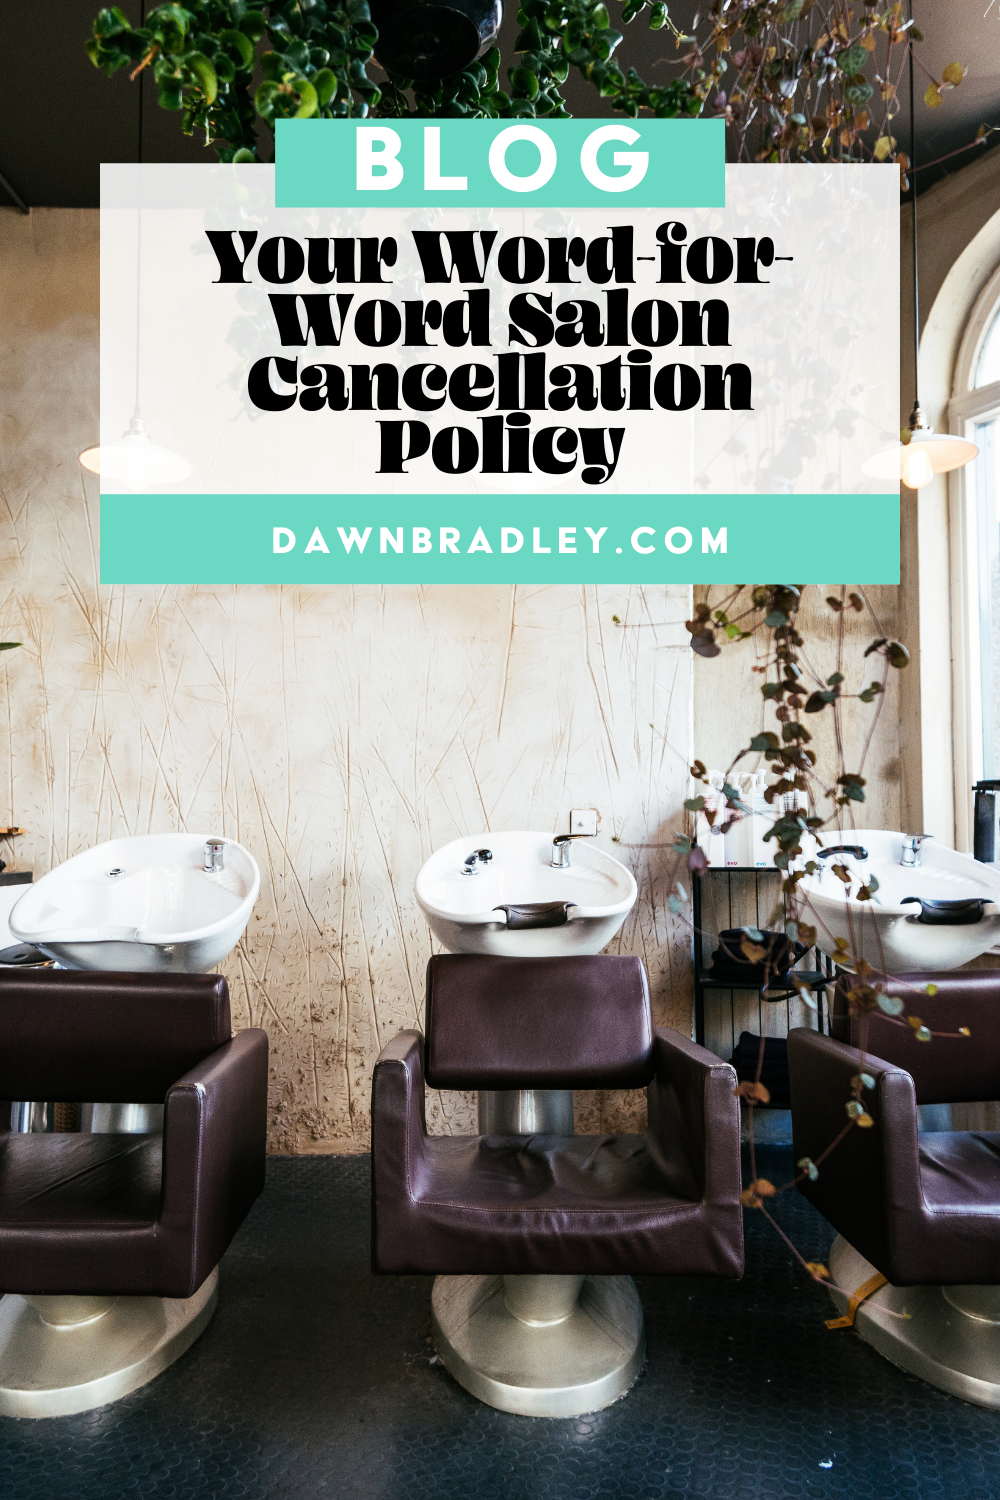 An earthy salon with brown chairs in front of sinks and a textured cream wall. There are green plants hanging from the ceiling and draping down over the sinks. Text overlay reads "Your word-for-word salon cancellation policy"